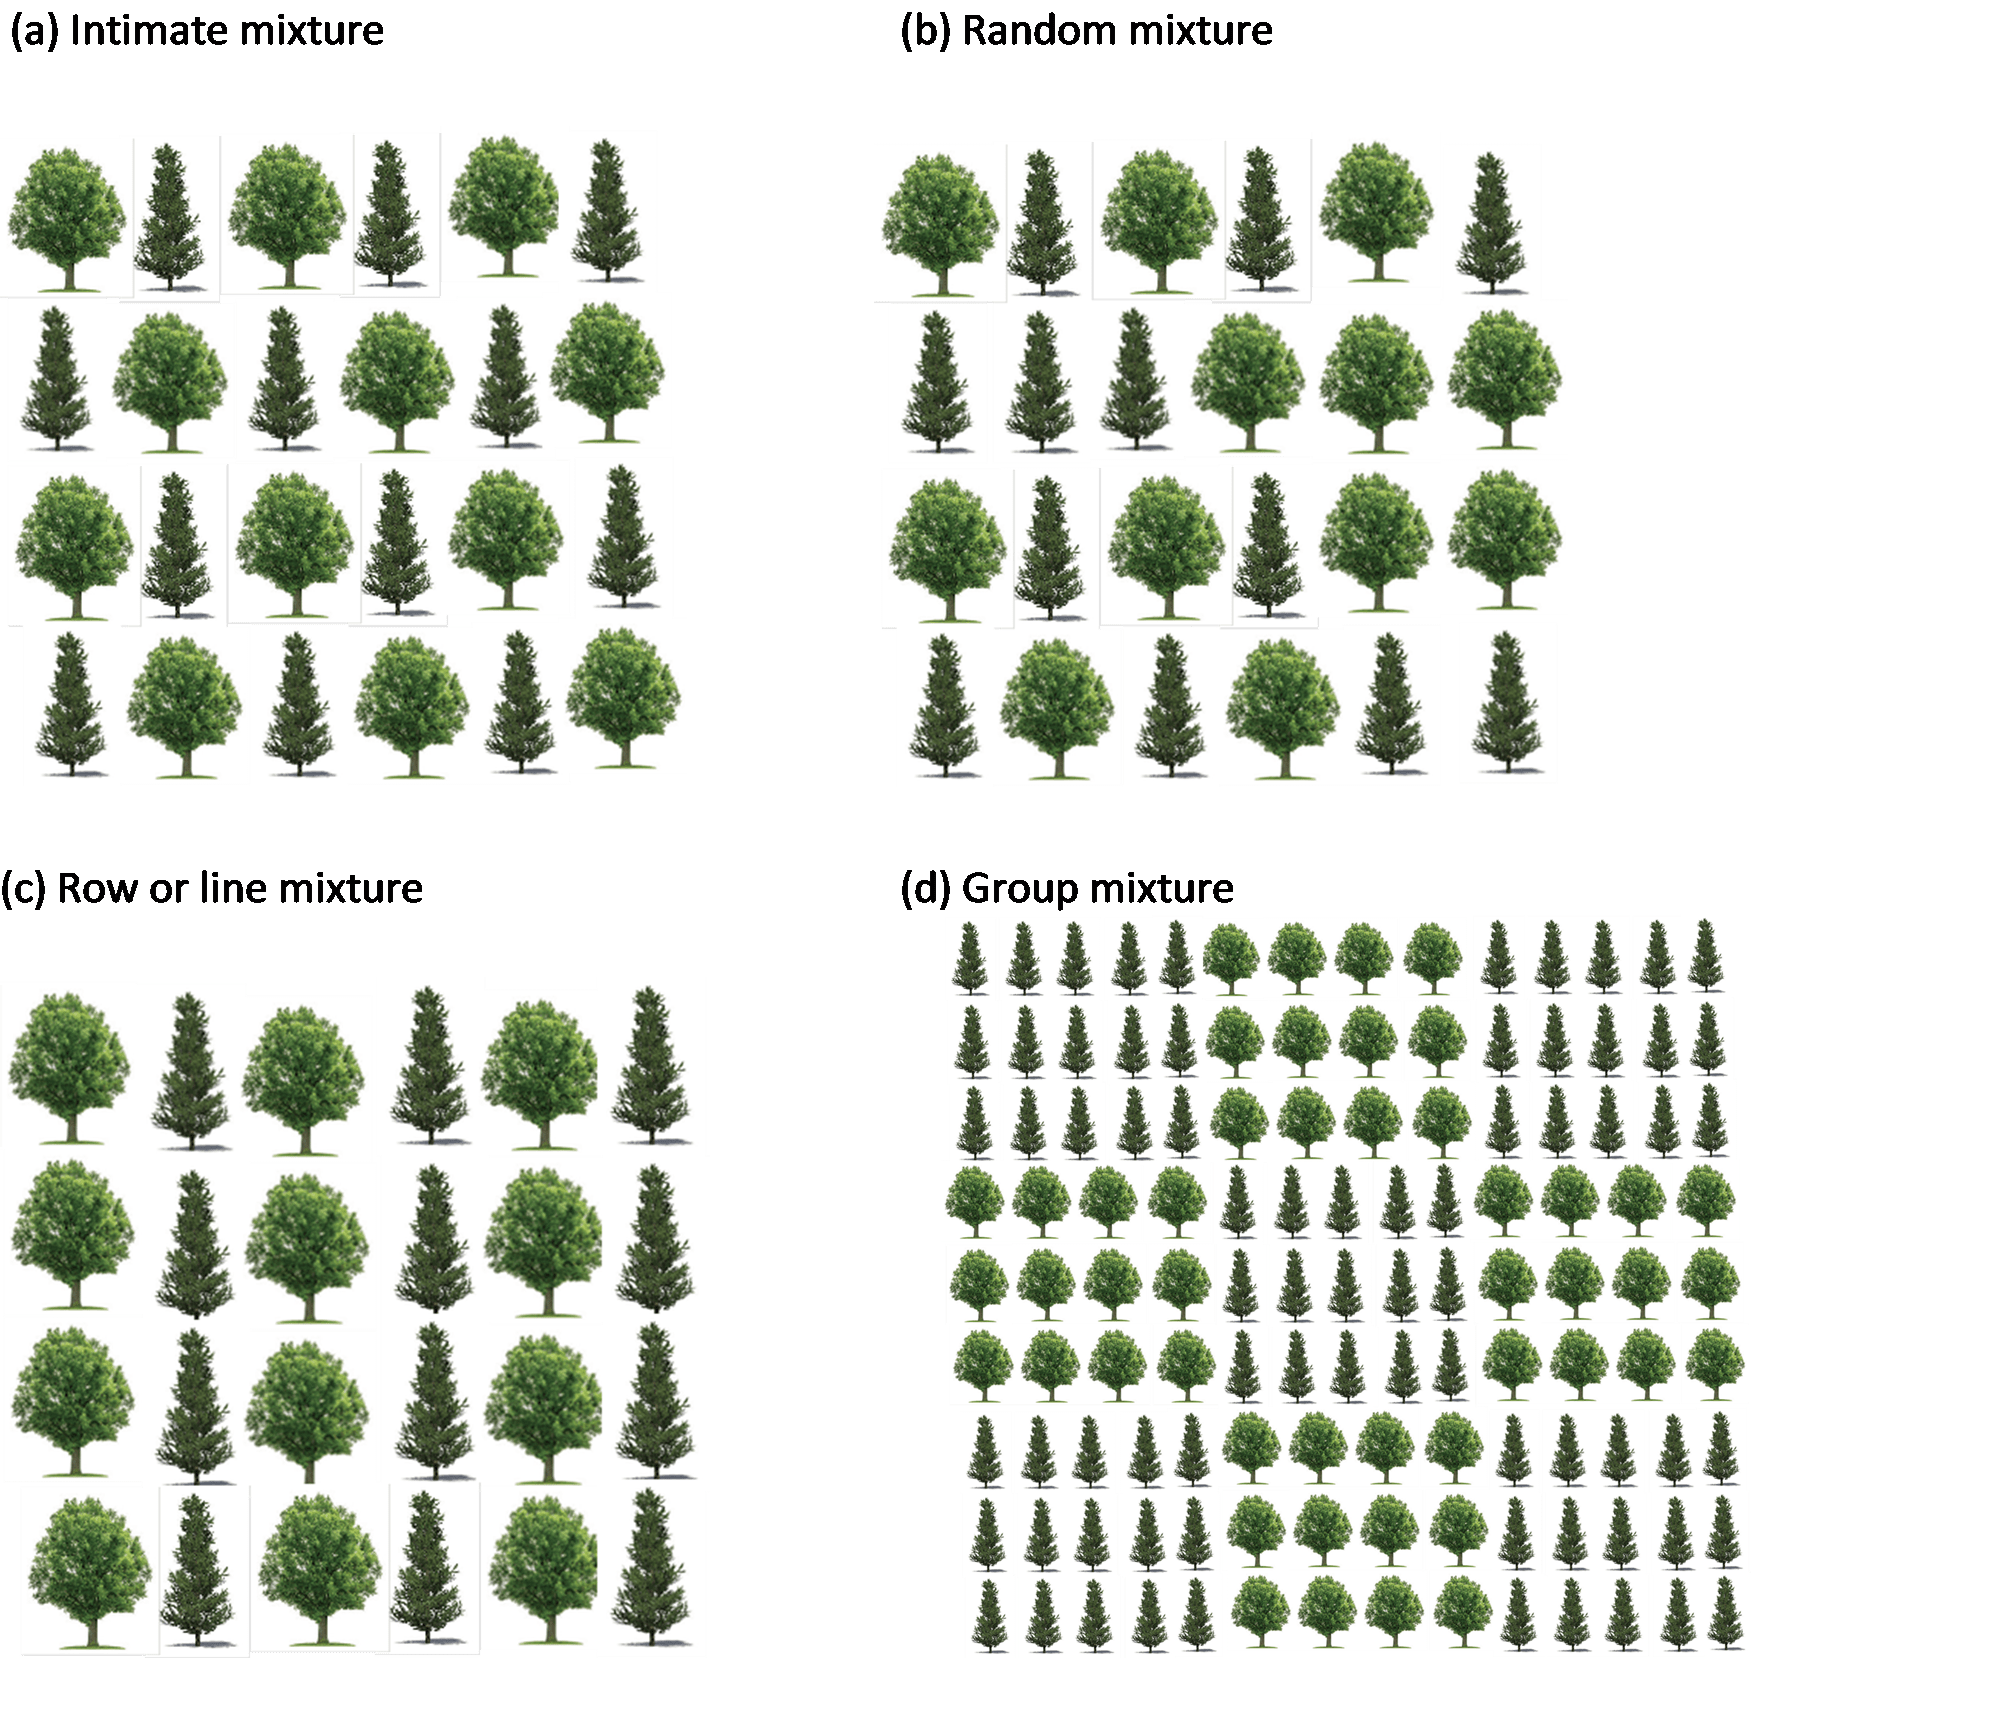 An illustration showing four different options for establishing mixtures of two tree species, that is; intimate, random, row or line, and group mixtures.